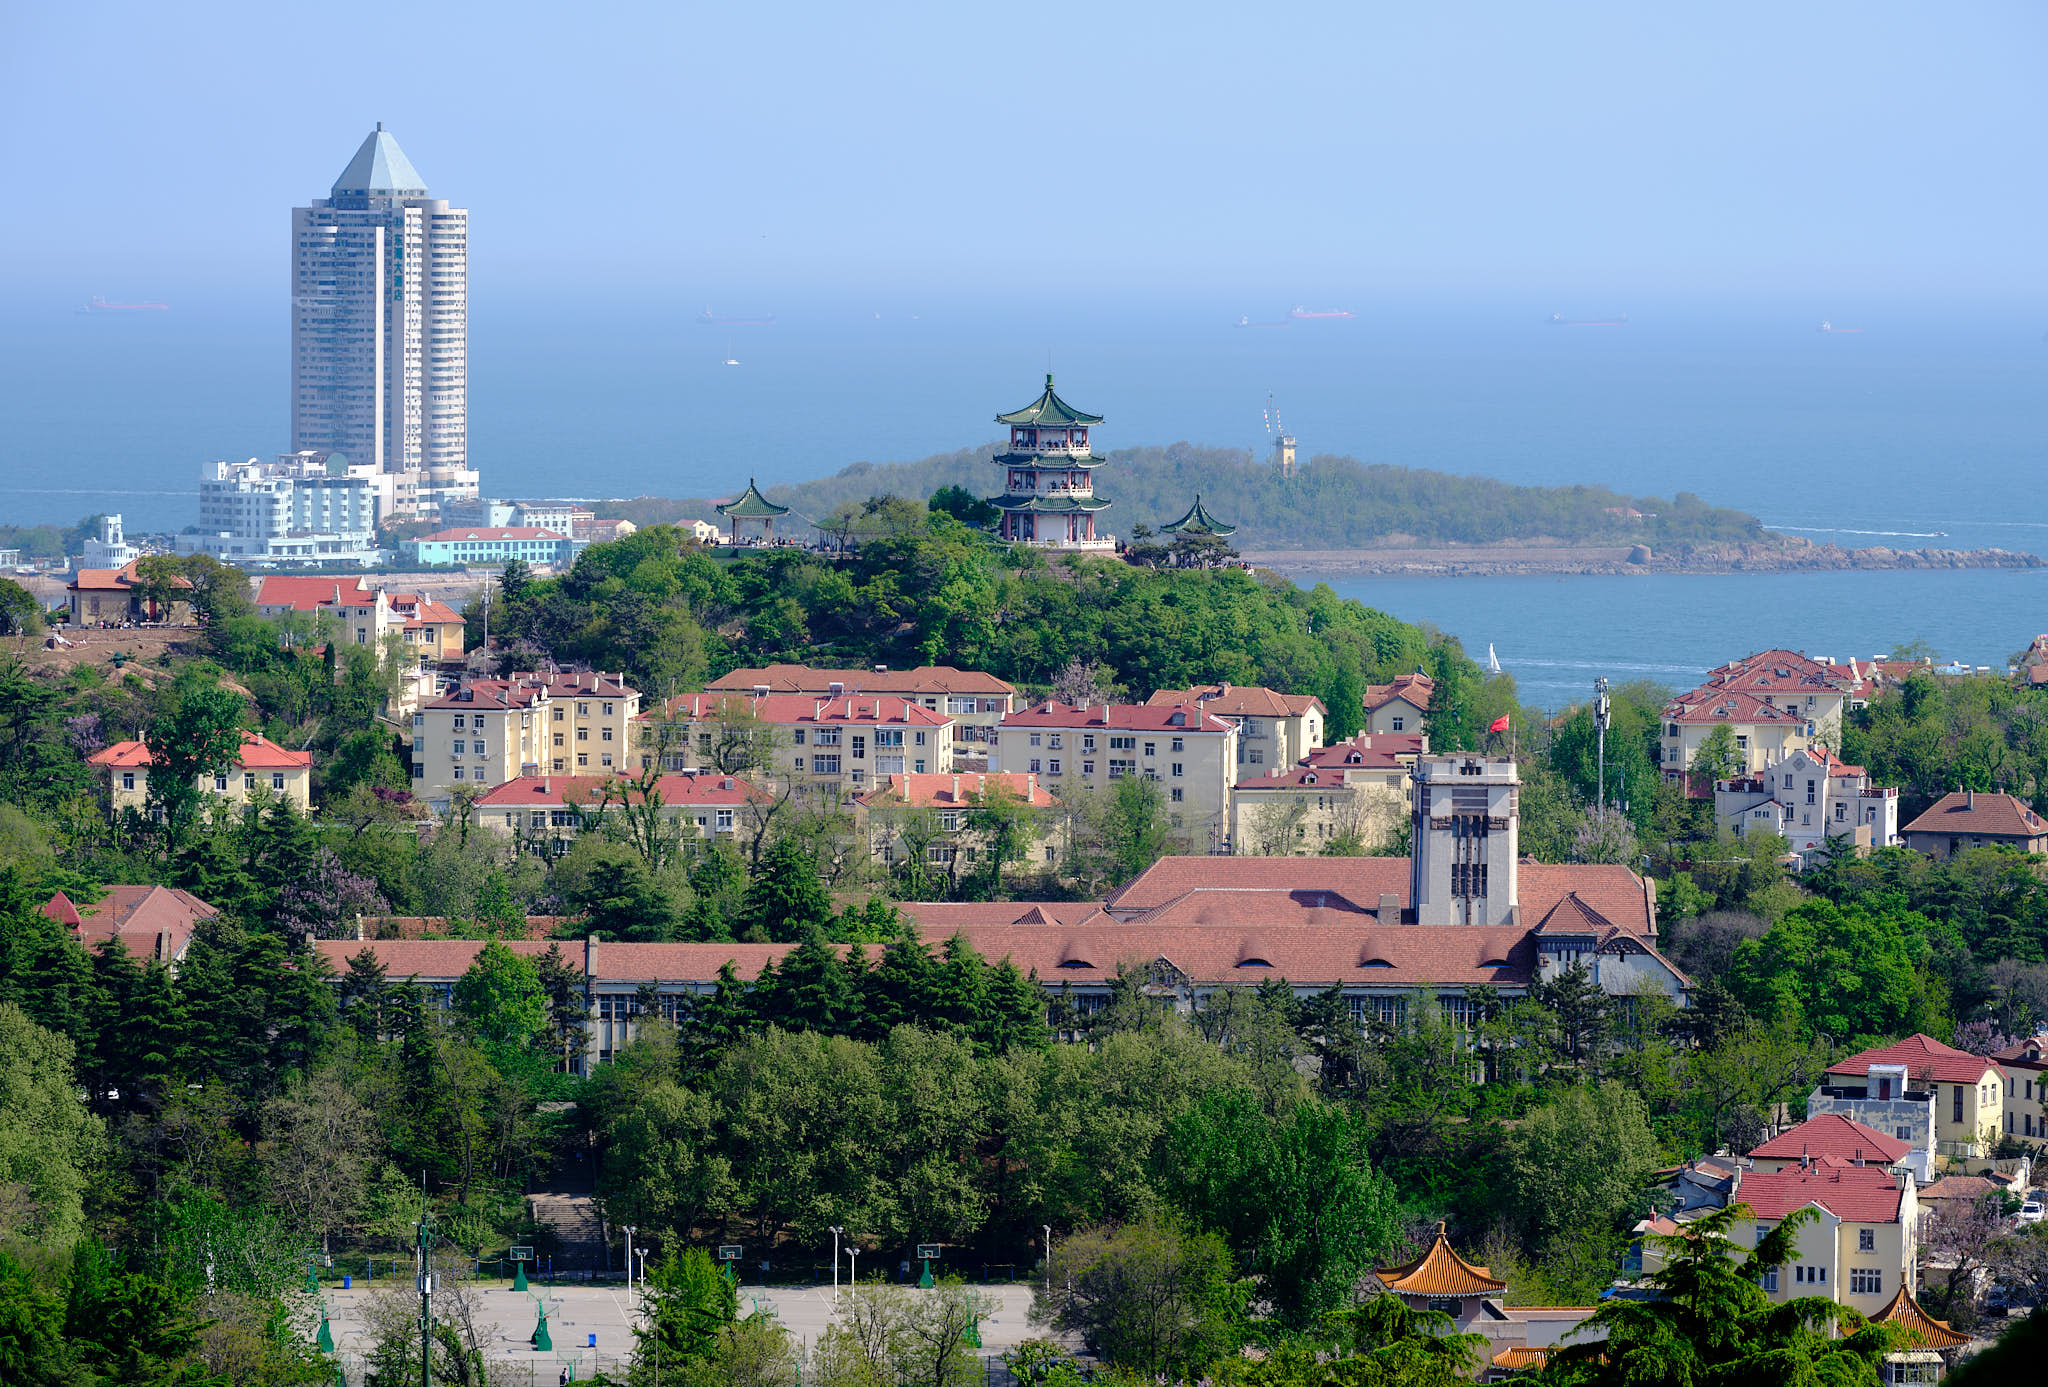 View of Qingdao from Signal Hill